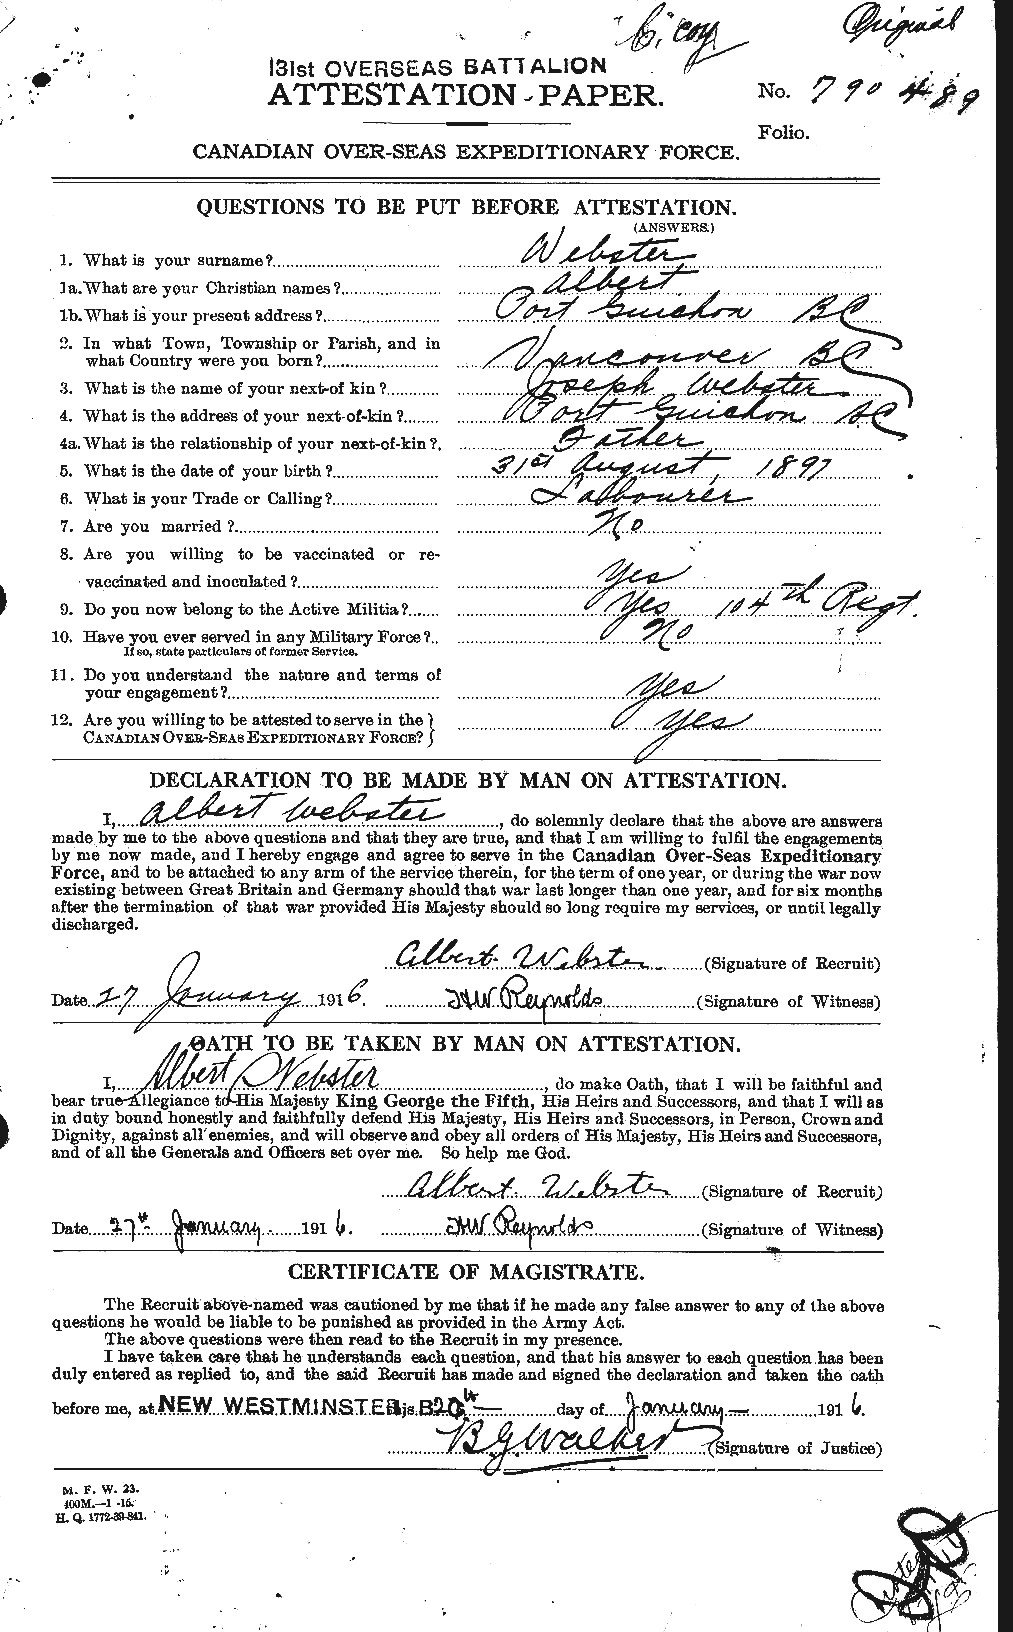 Personnel Records of the First World War - CEF 670224a